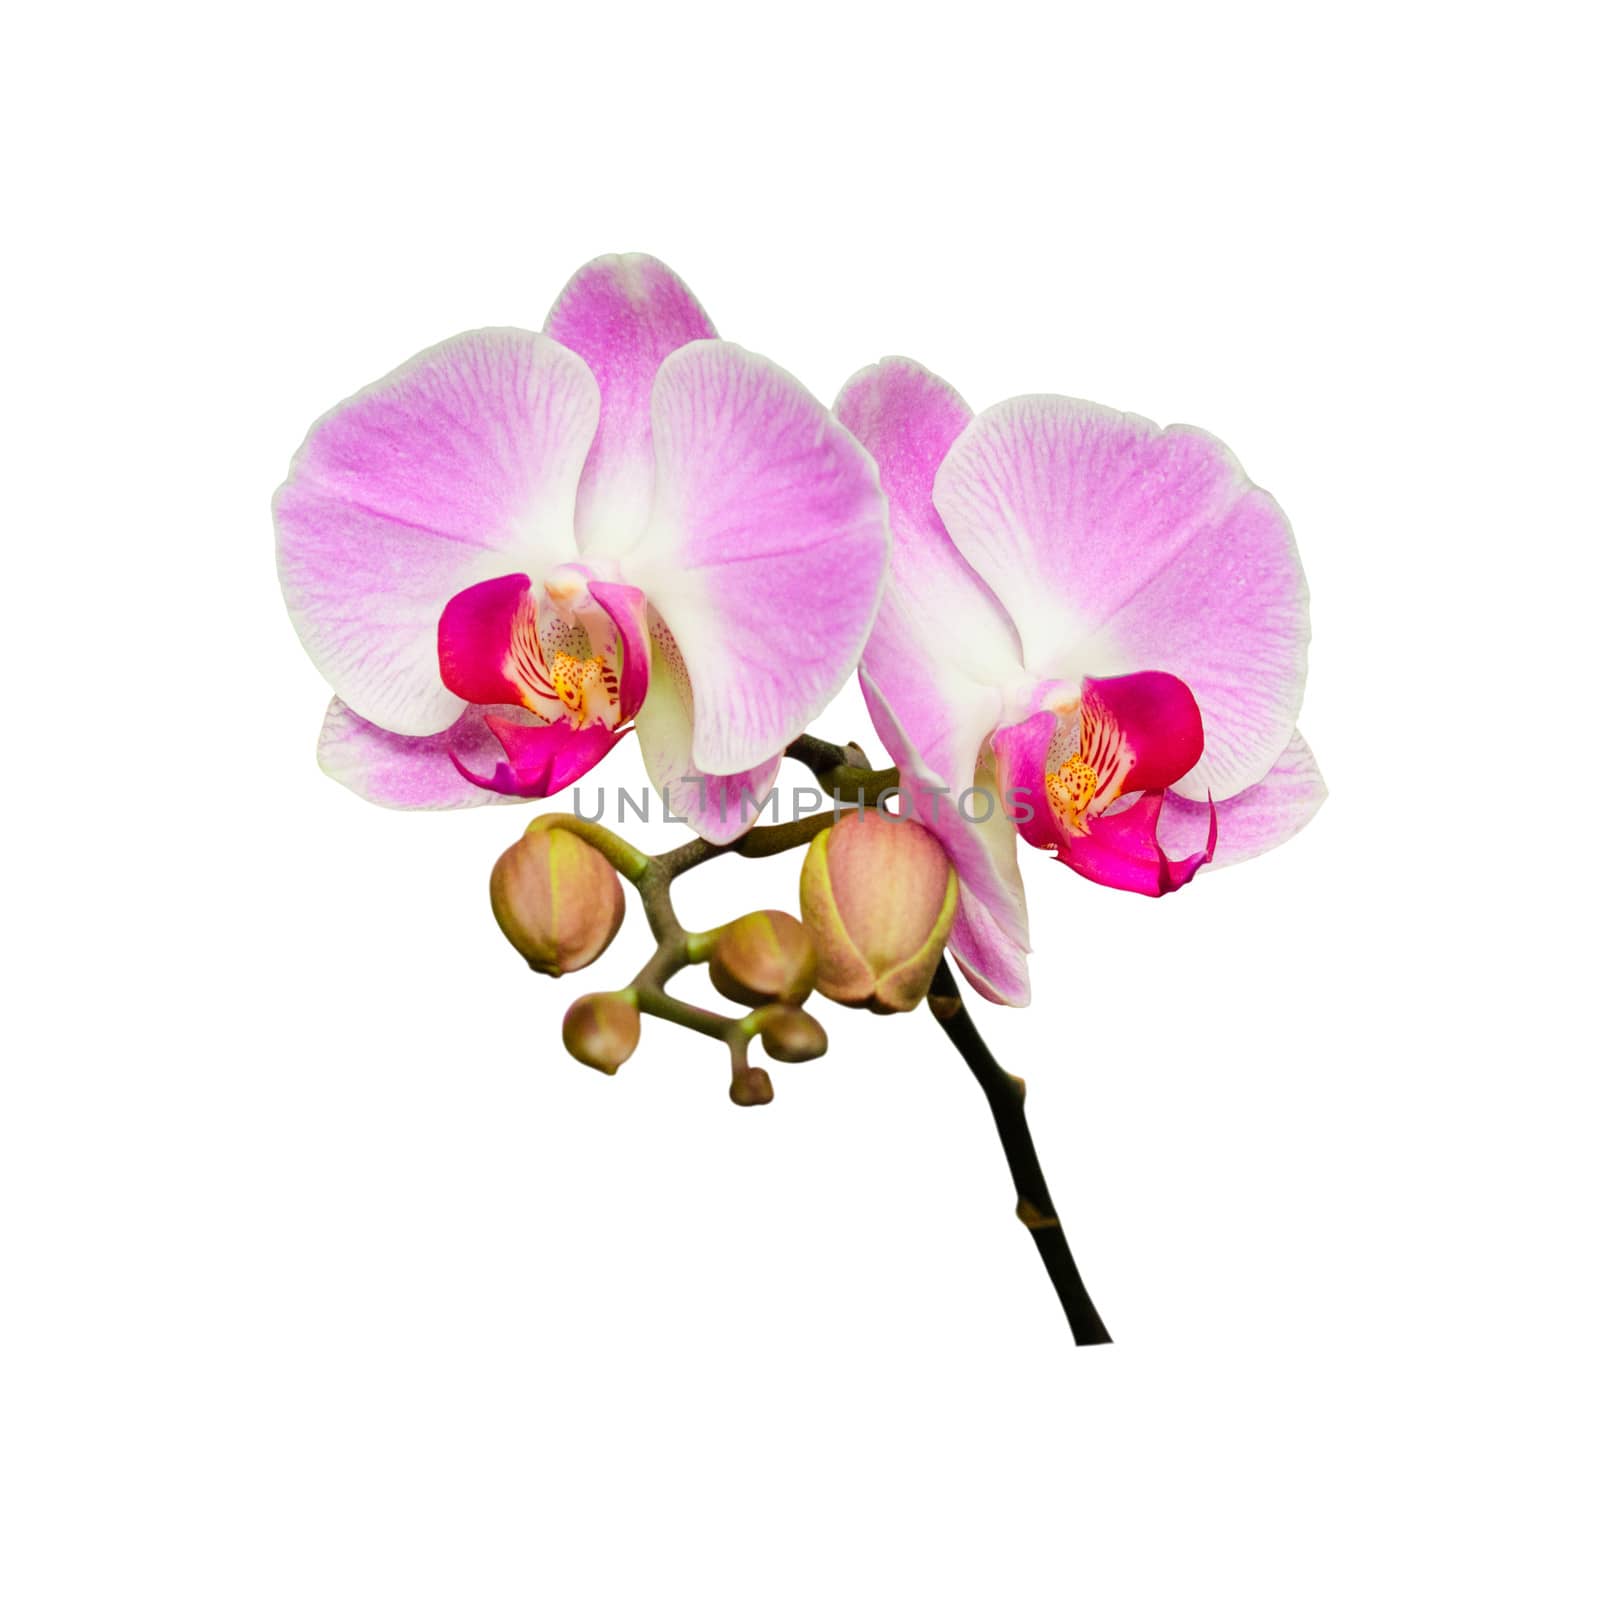 Small branch of orchids flowers with buds by servickuz